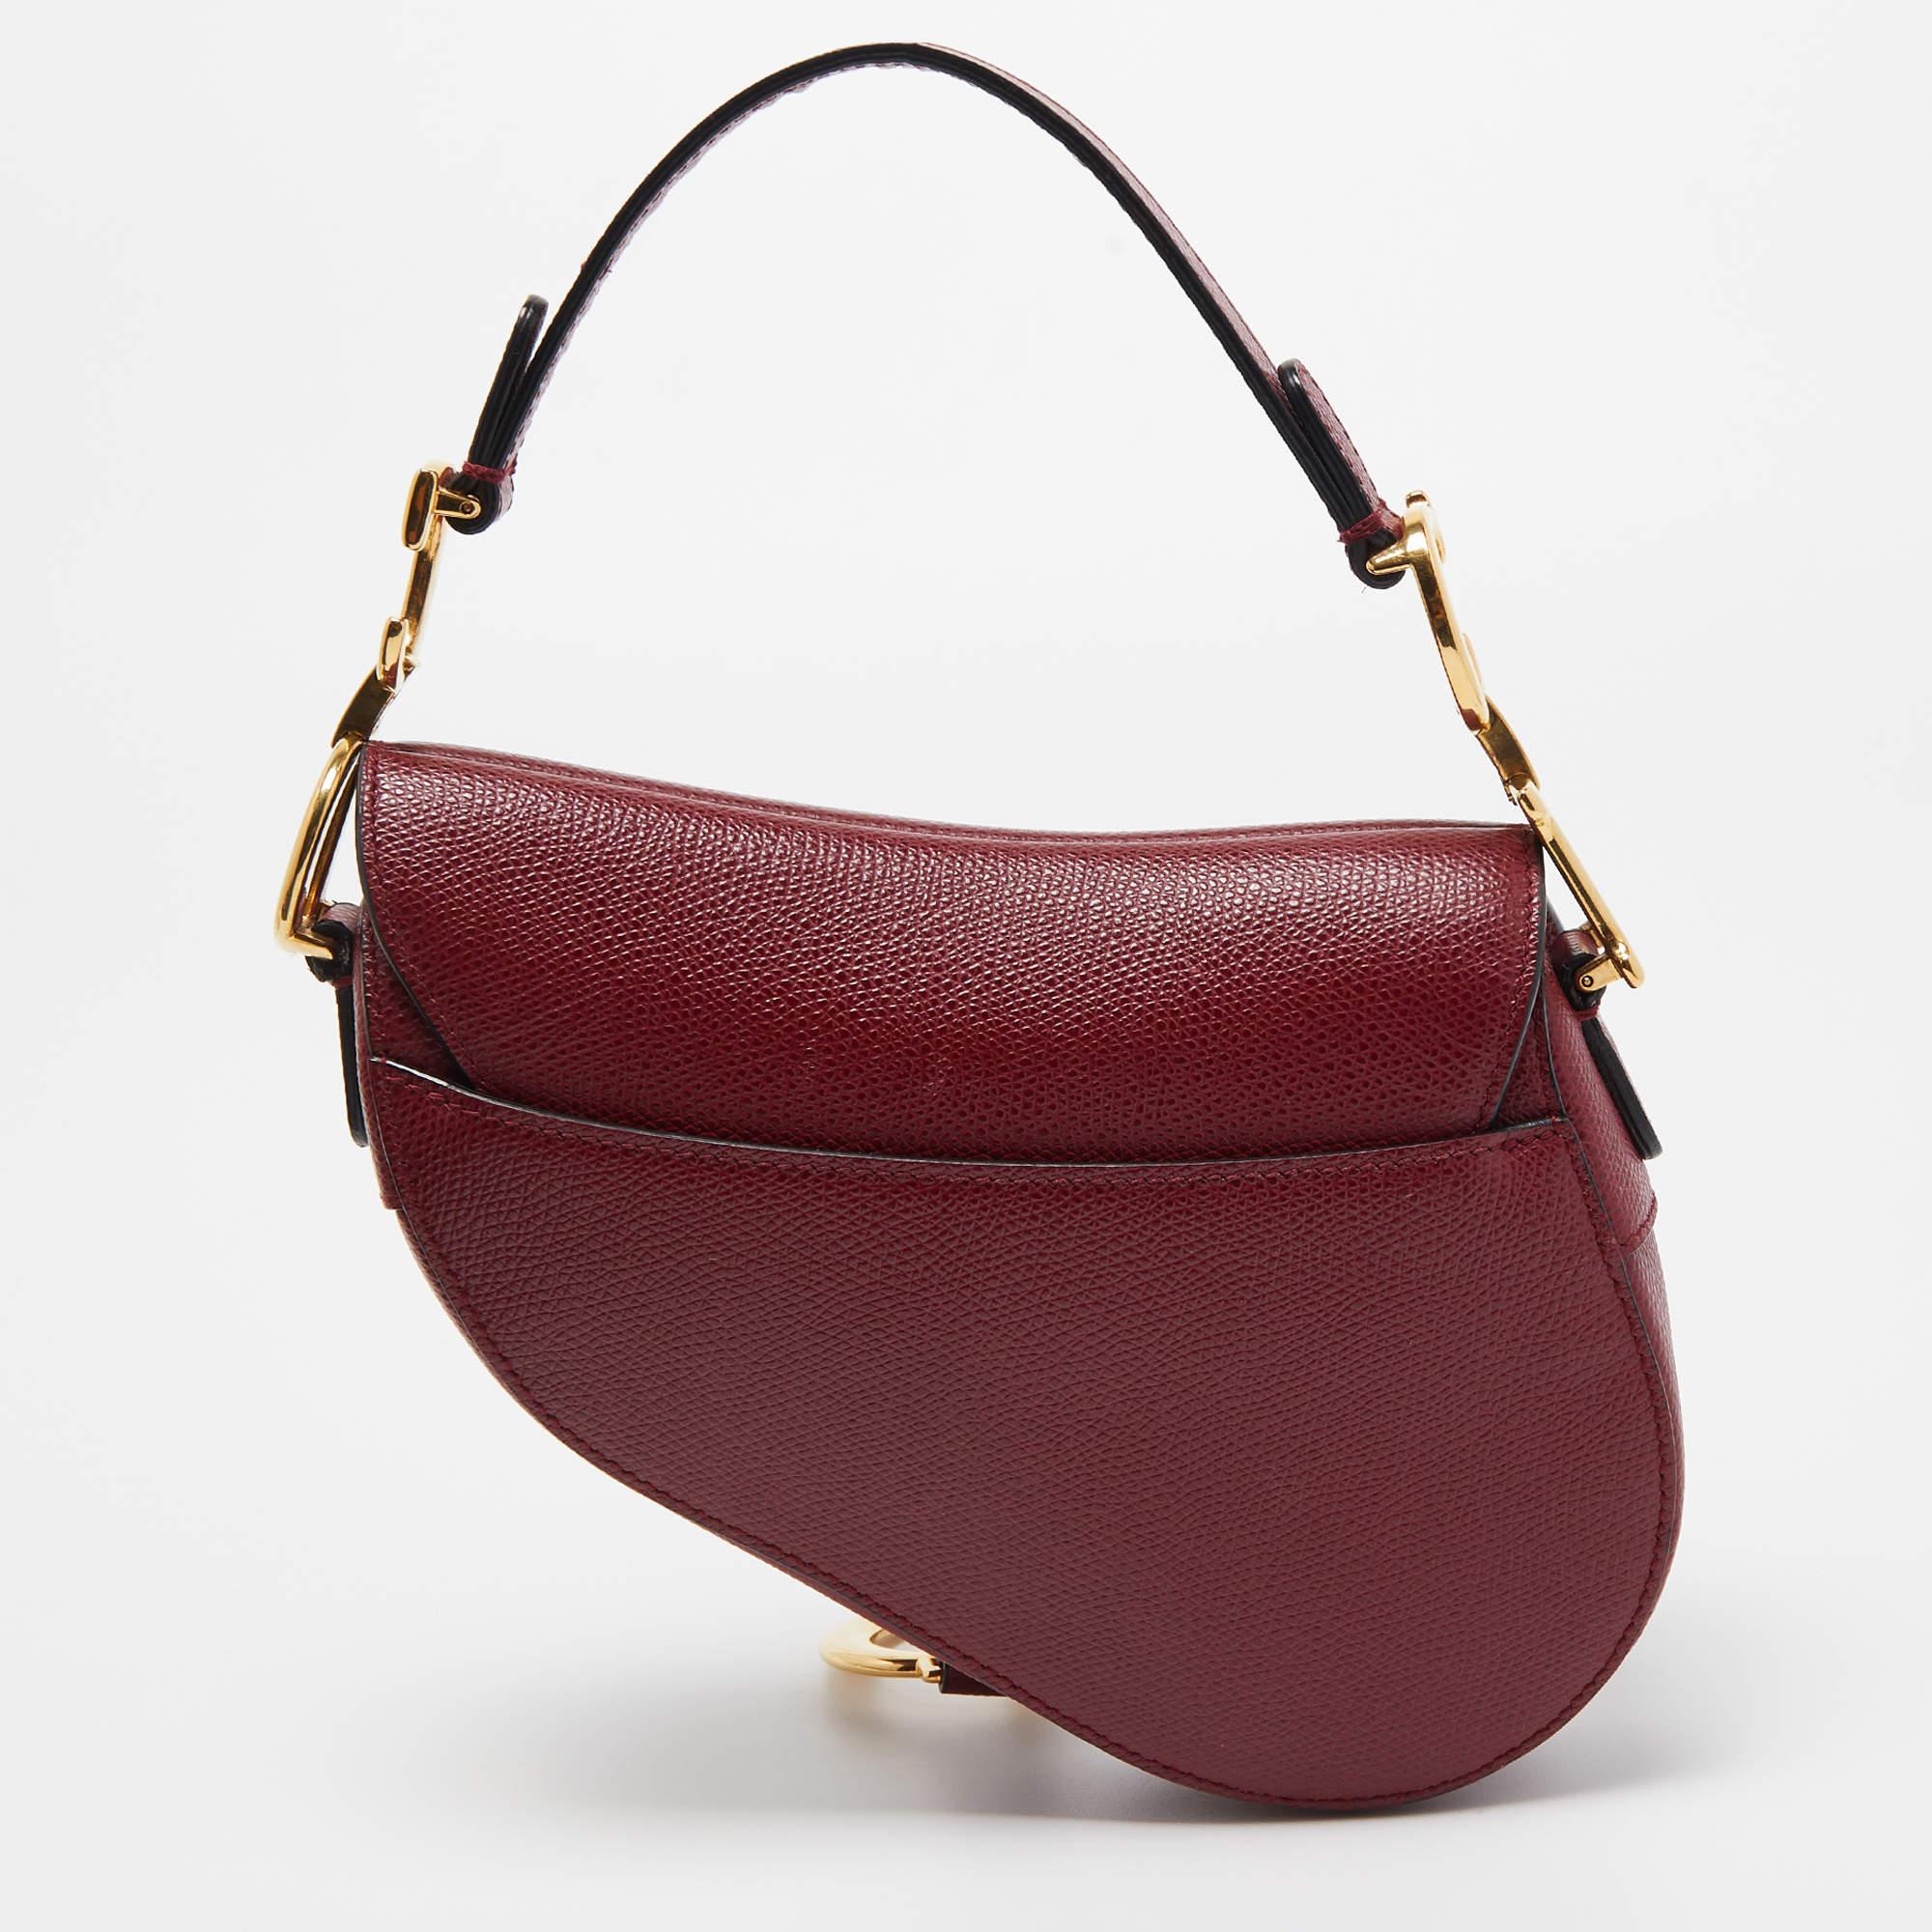 The Dior saddle bag is a chic accessory that epitomizes elegance. Crafted from luxurious red leather, it features the iconic saddle shape, a compact size, and the signature Dior logo. A perfect blend of style and sophistication.

Includes: